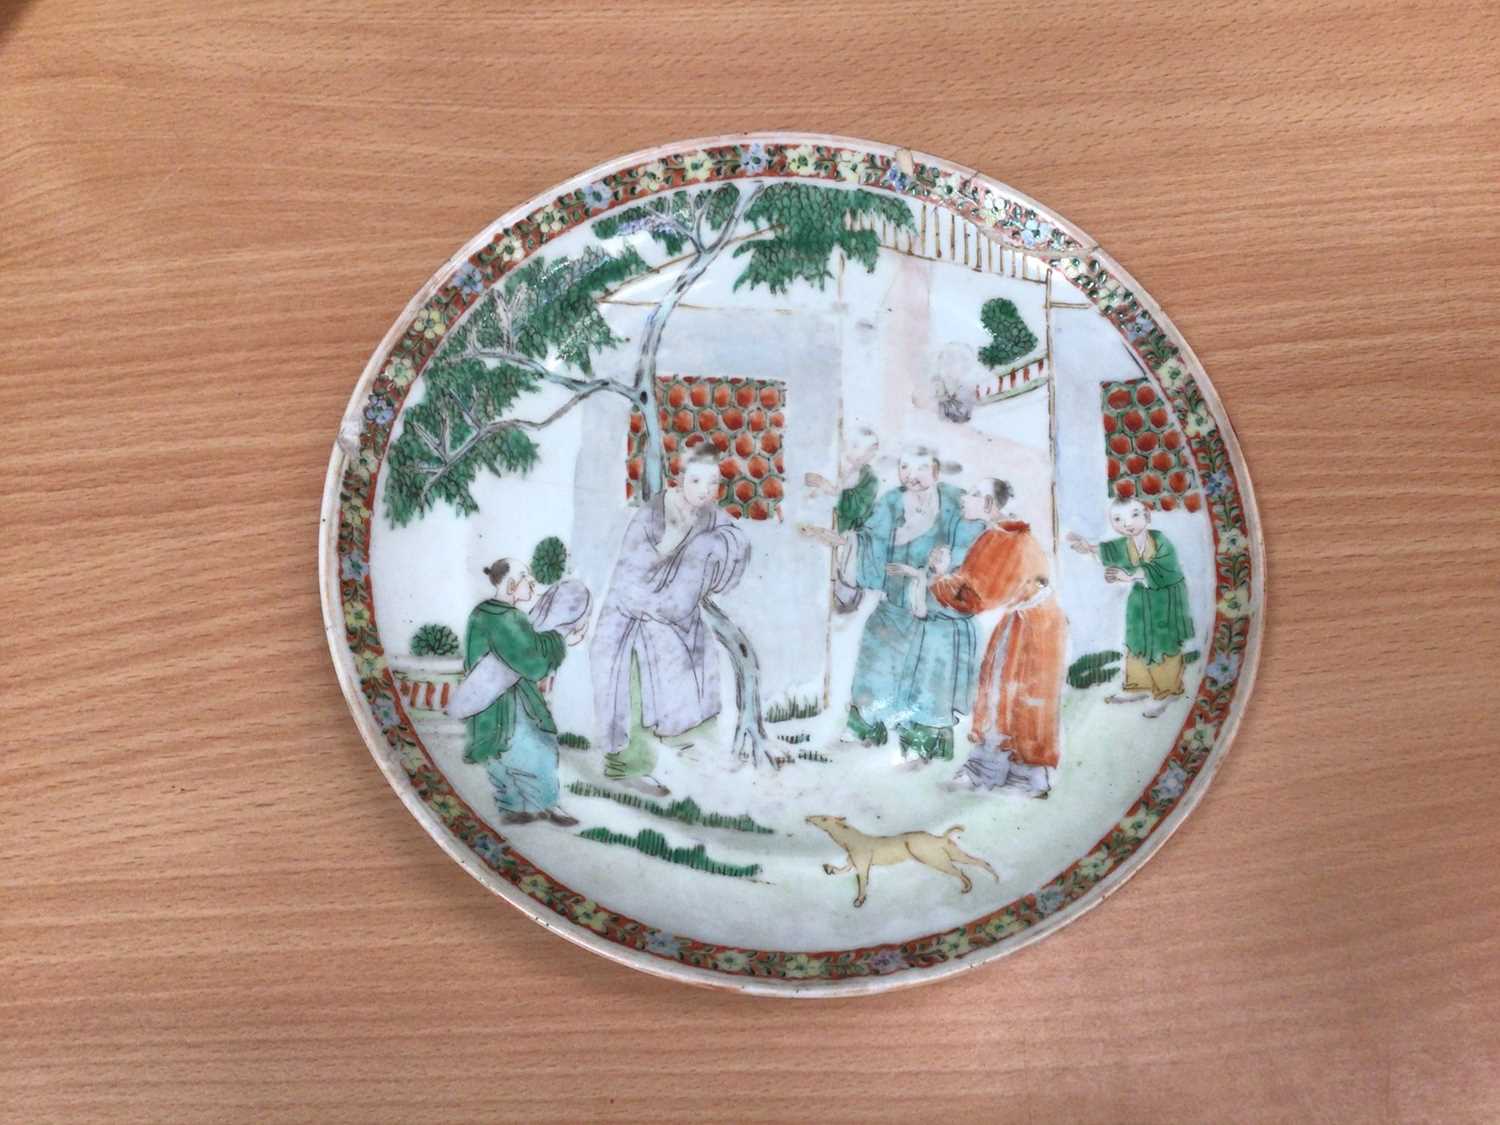 Six 19th century Chinese polychrome porcelain plates decorated with figures, birds and flowers - Image 5 of 12